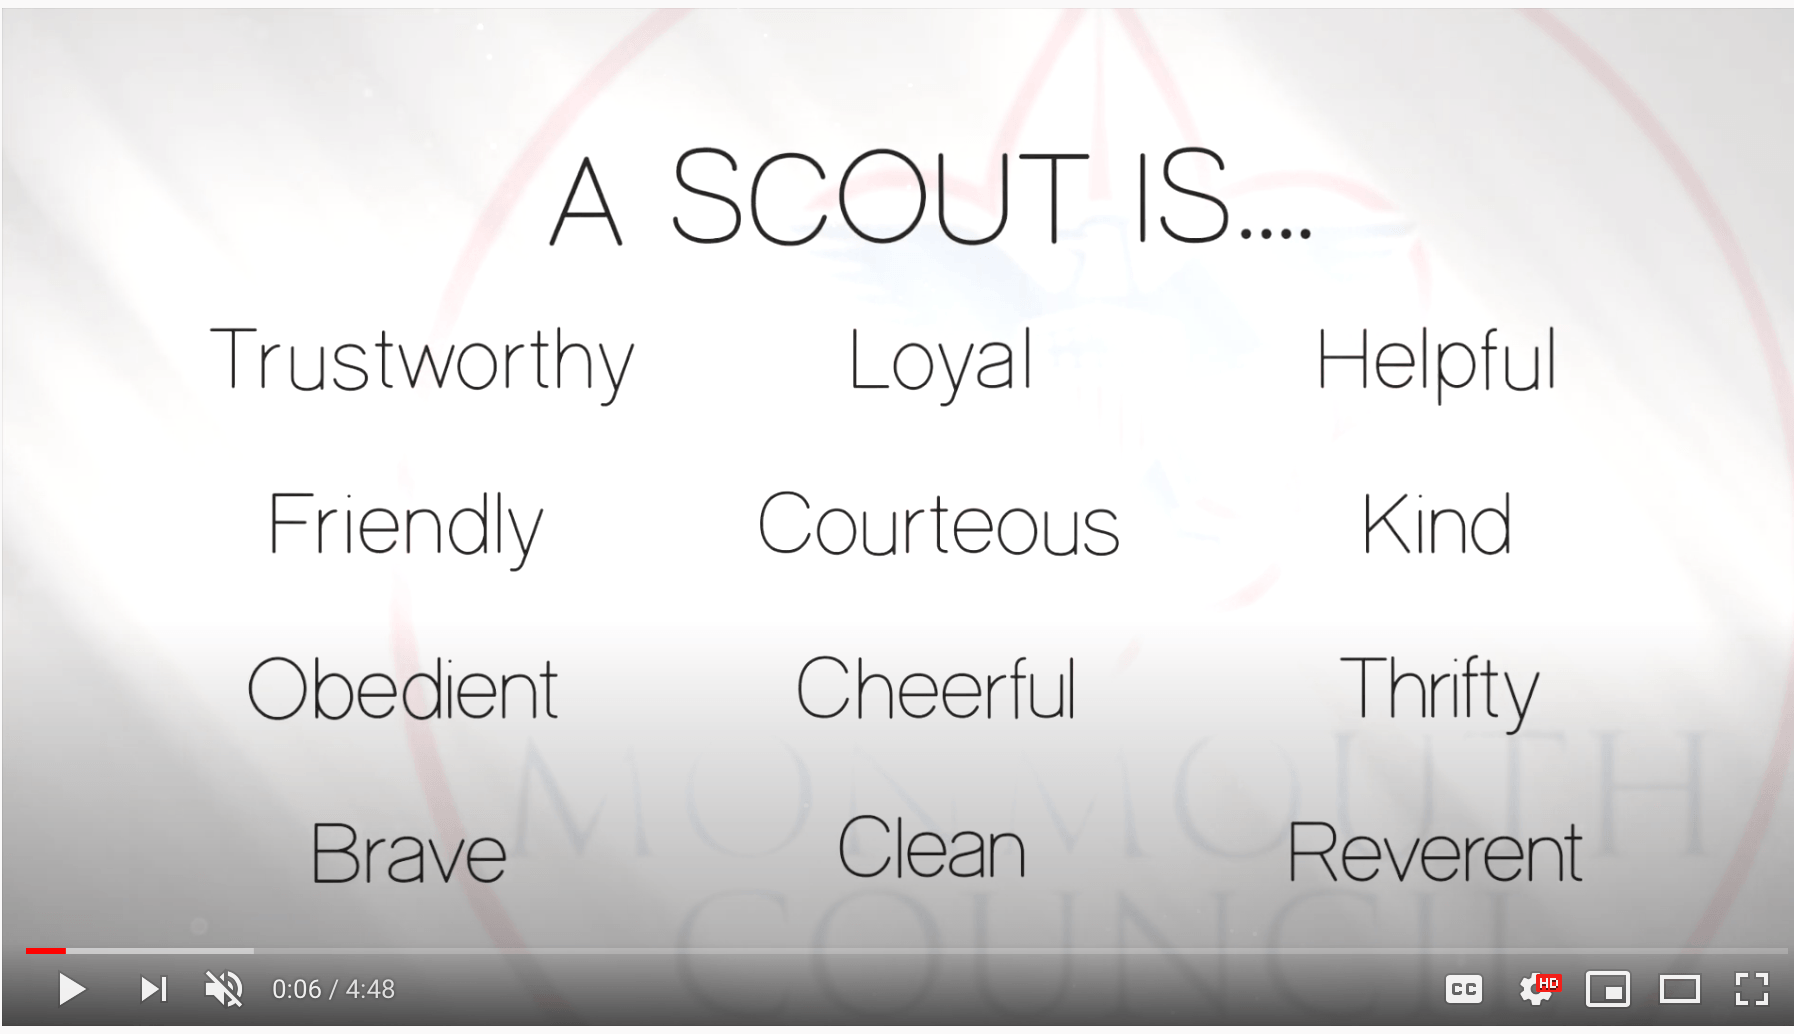 Traits of a Scout